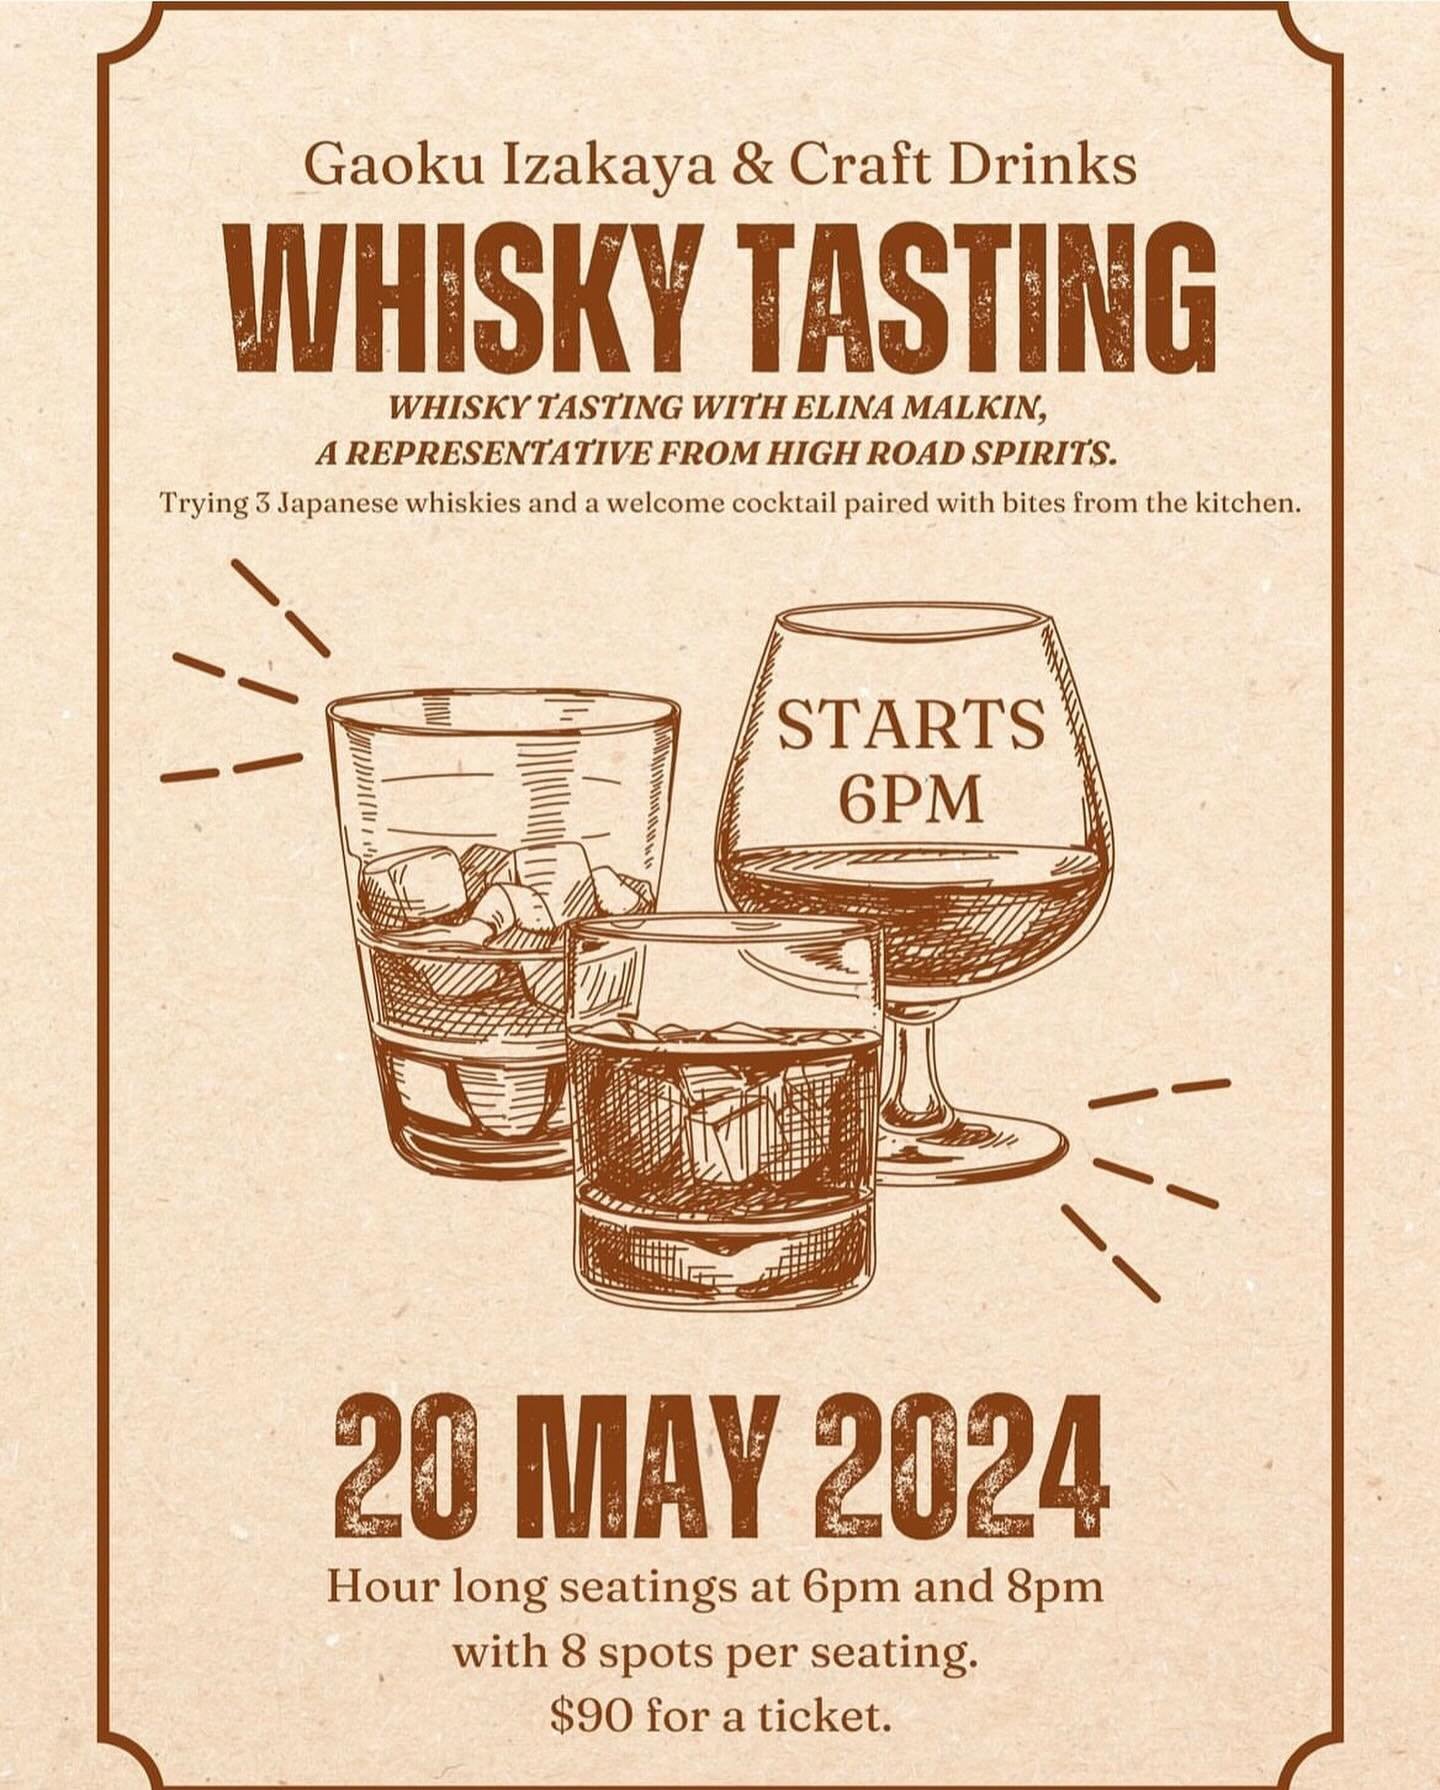 This Monday! Join @elina_sips_spirits for a special whisky tasting at @bar.gaoku on May 20th at 6pm or 8pm. Link in bio / stories to reserve your seats today 🥃 #highroadwineandspirits #hrws #gaoku #izakaya #whiskytasting #japanesewhisky #pairing #wh